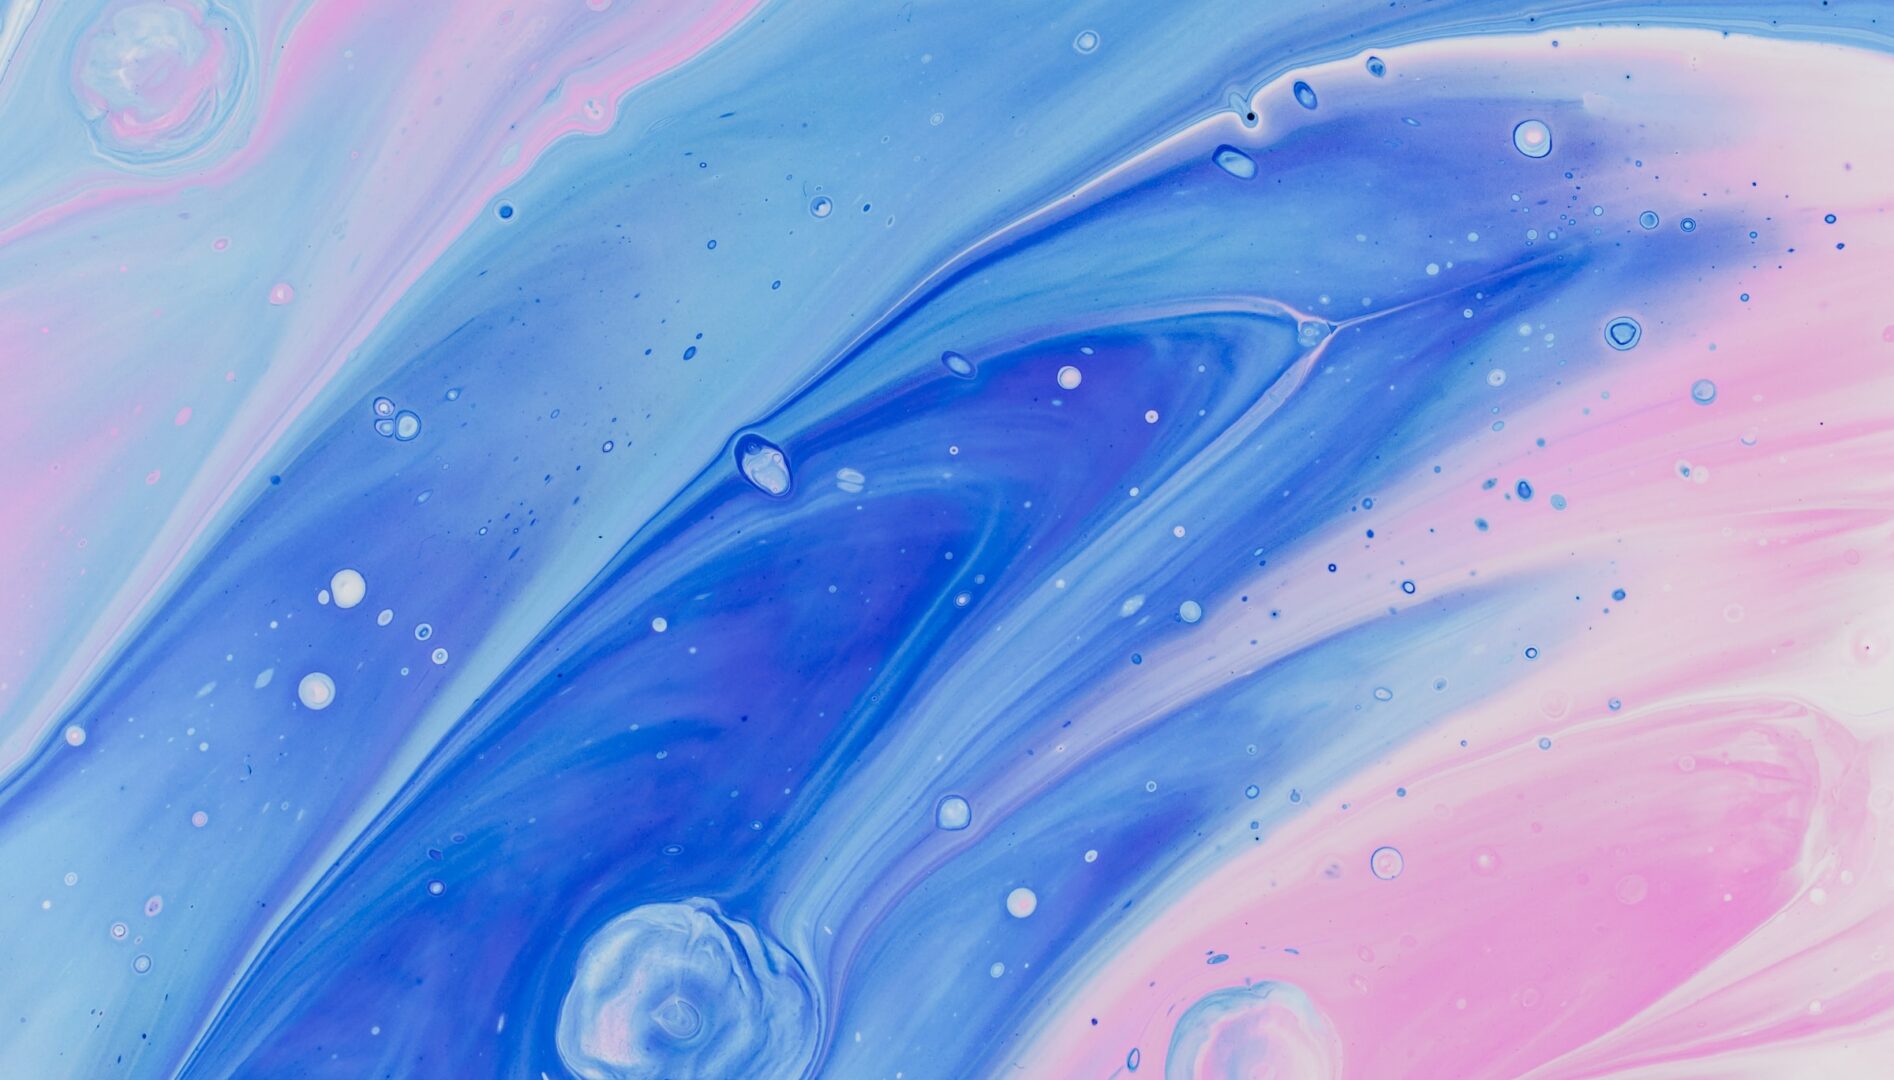 Abstract blue, pink, and white image